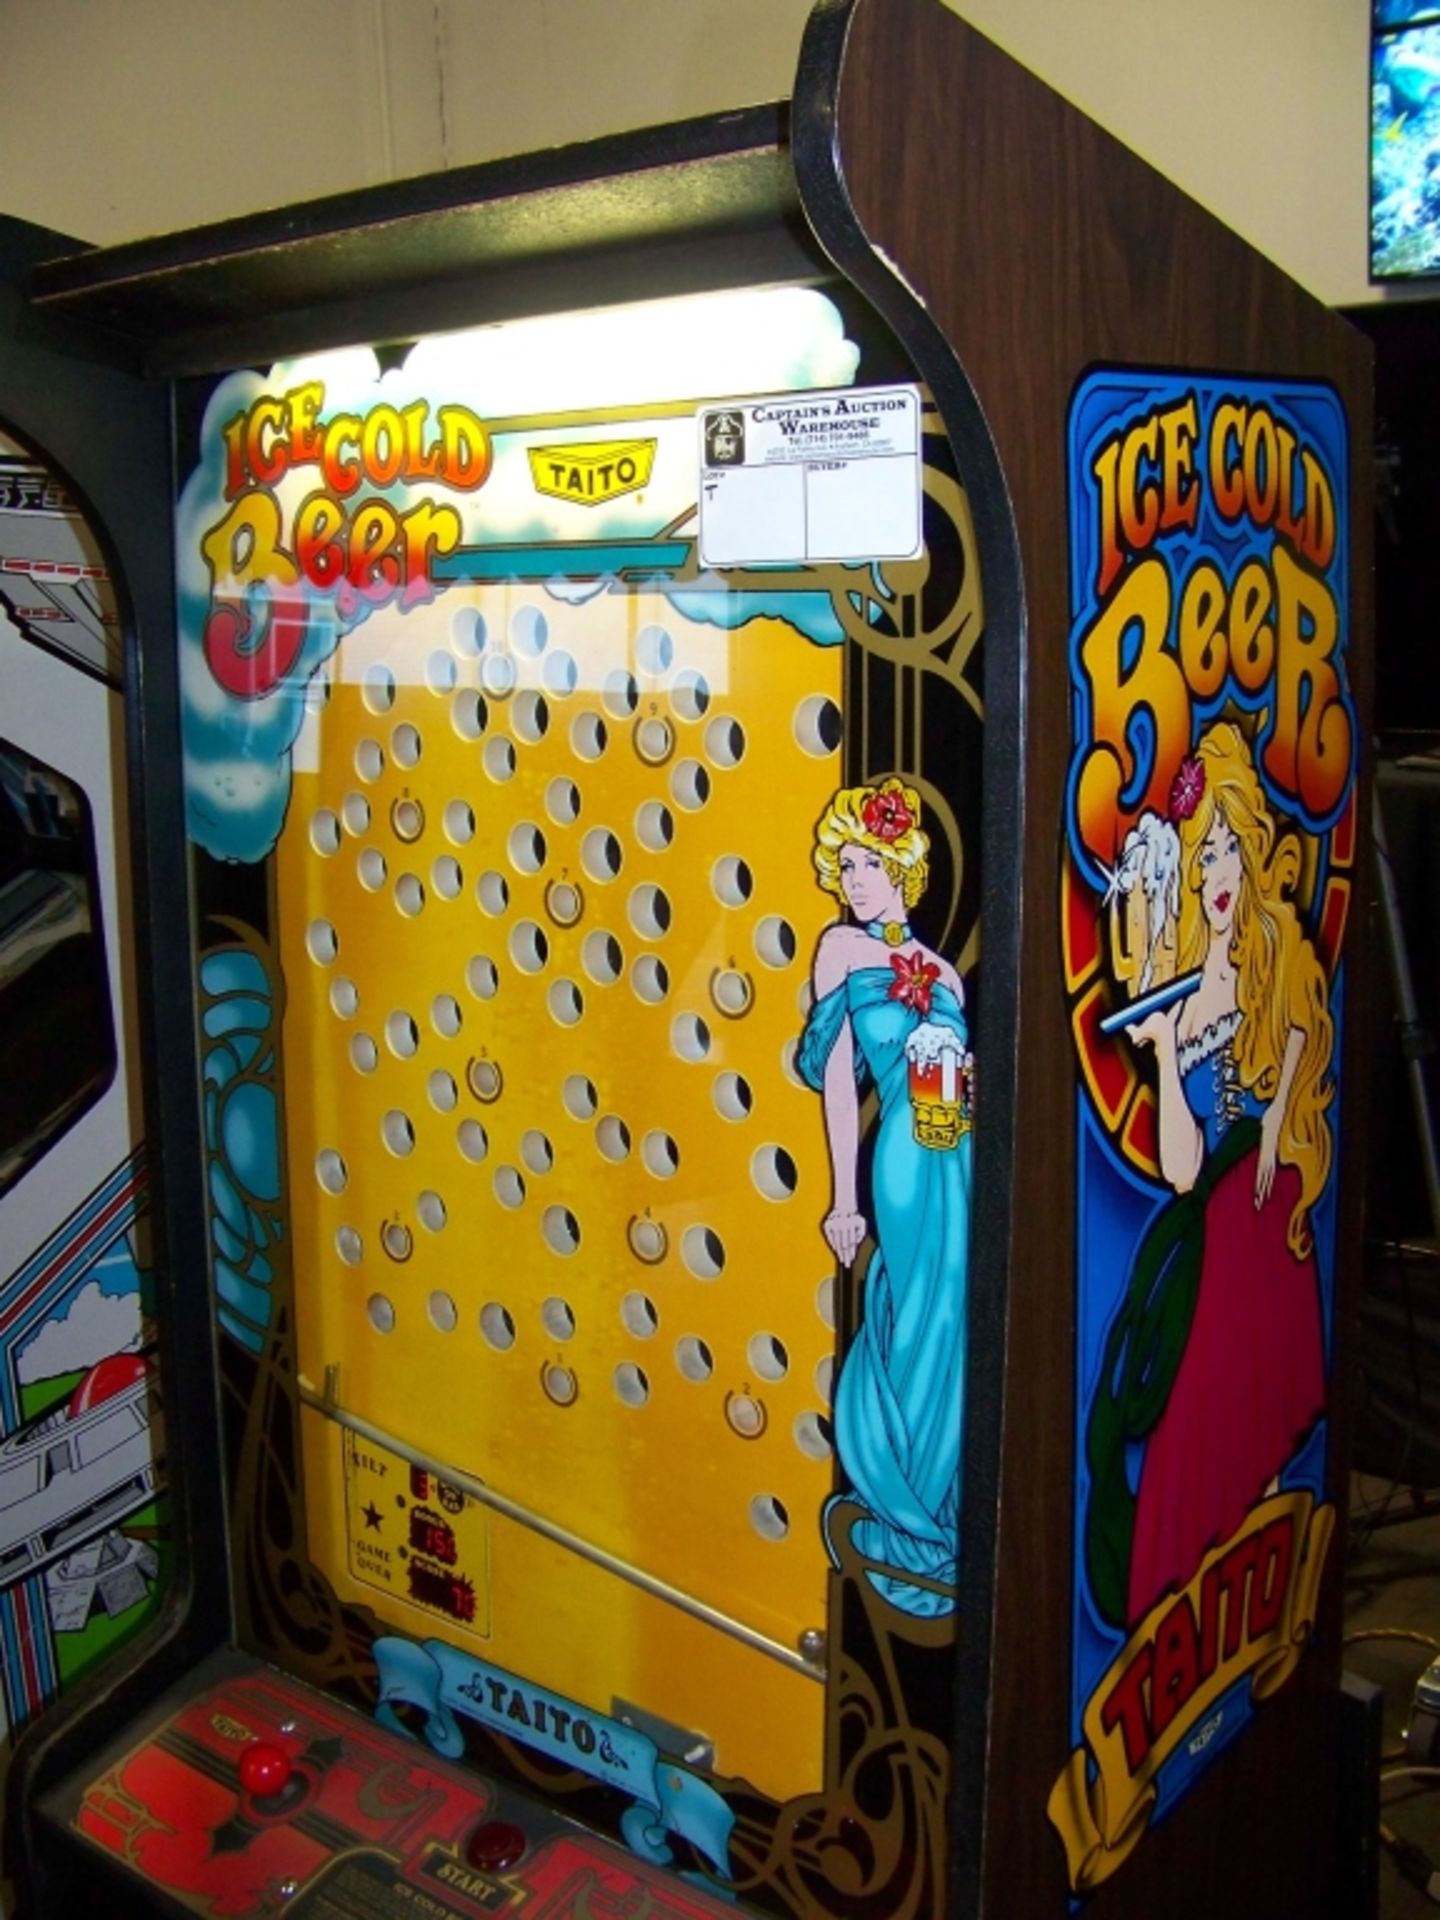 ICE COLD BEER ARCADE GAME TAITO CLASSIC - Image 5 of 7